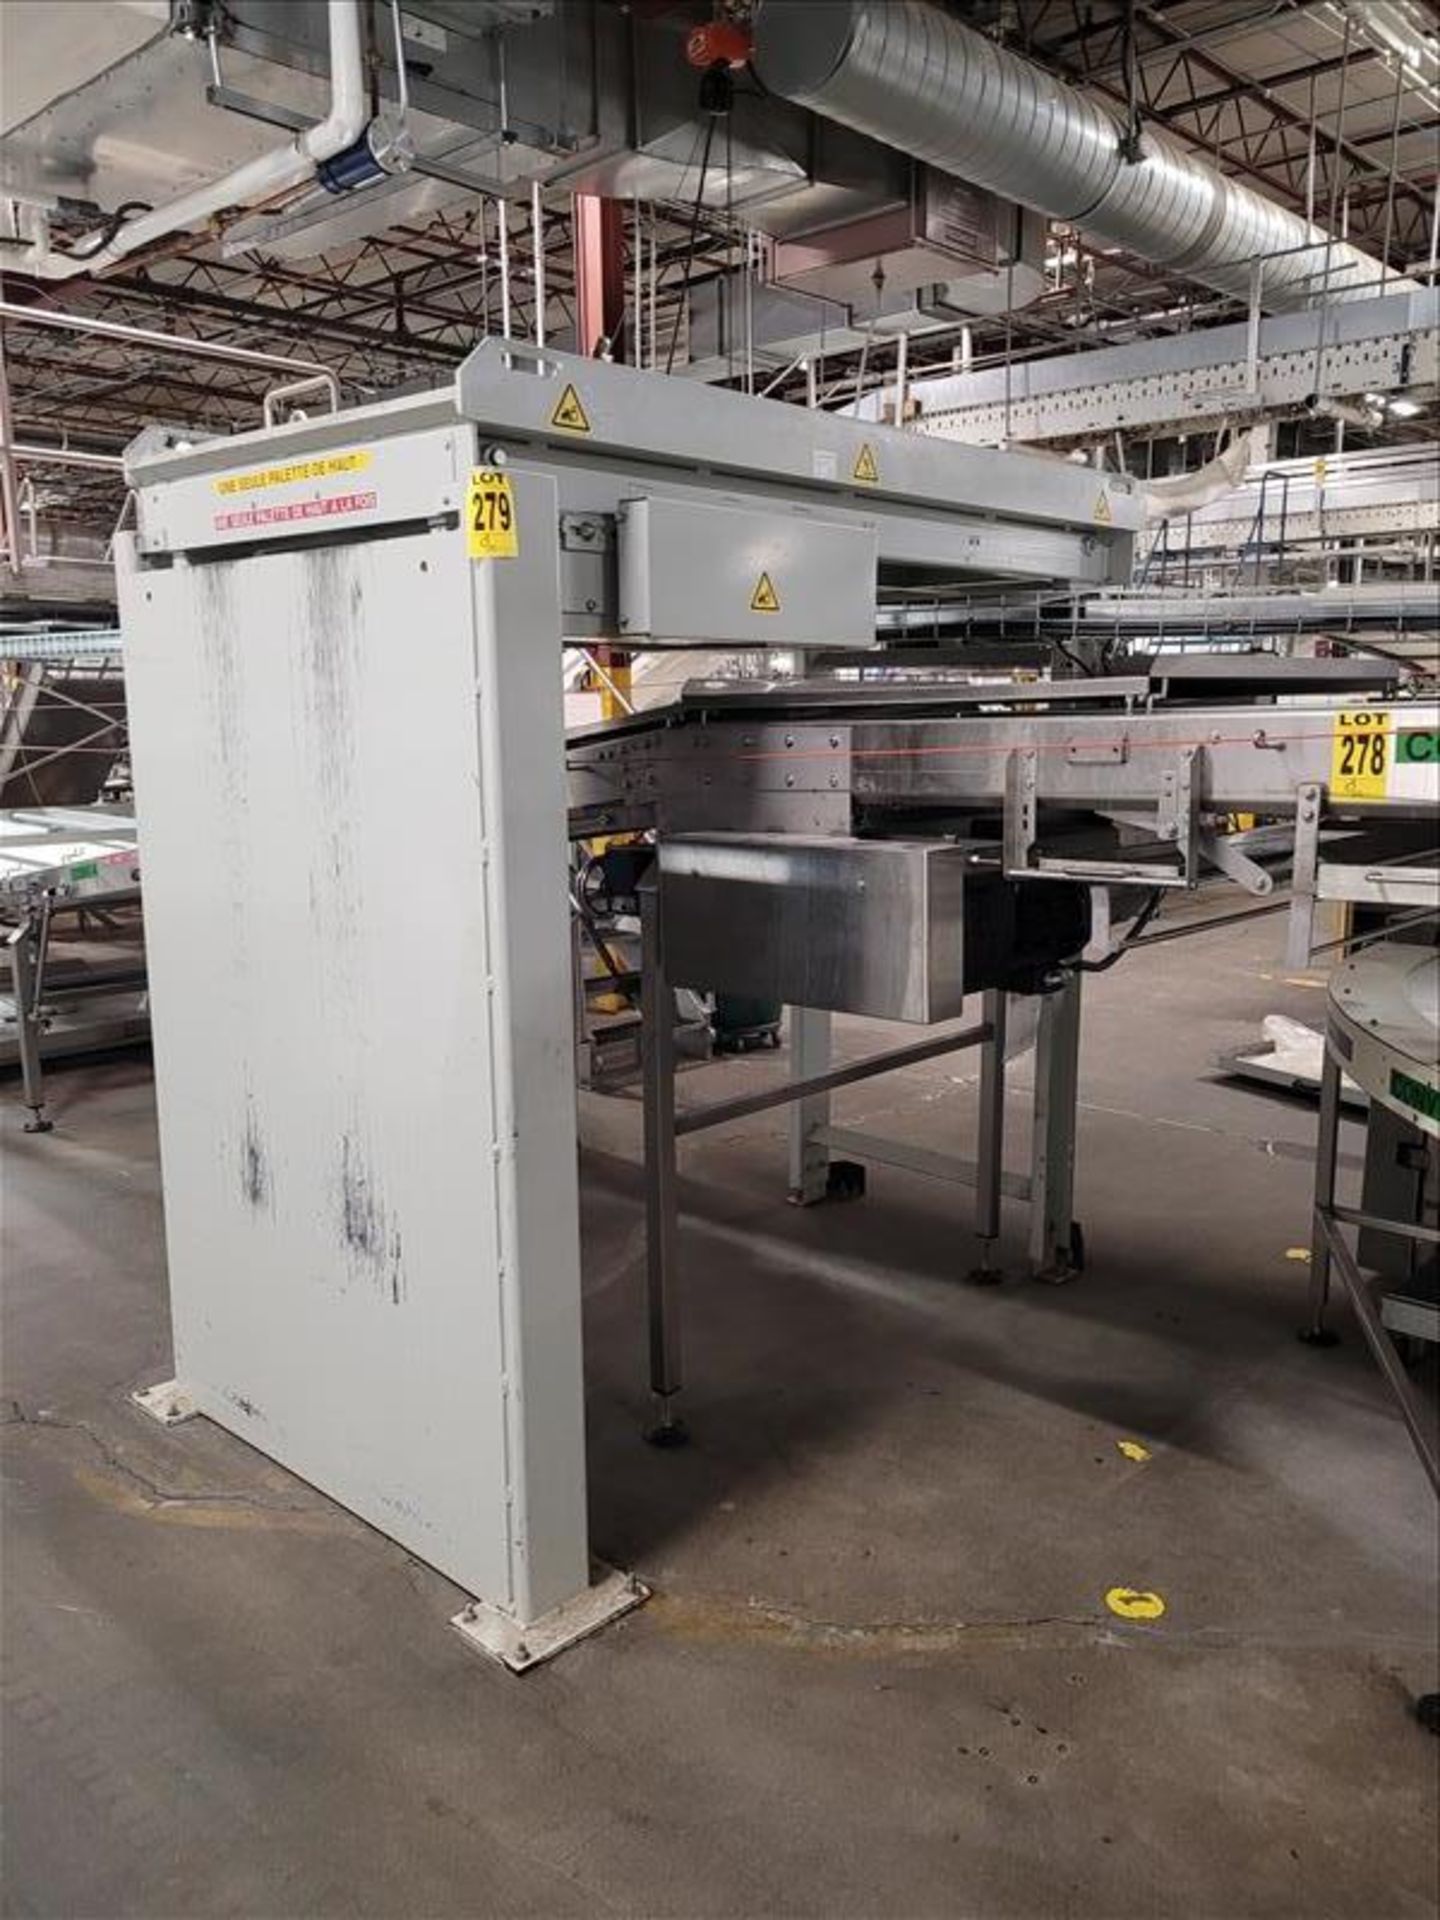 Premier-Tech Pallet Bridge, 1 Pallet @ a Time, Overall Dims.: Approx. 80 In. L x 4 In. W (LOCATED